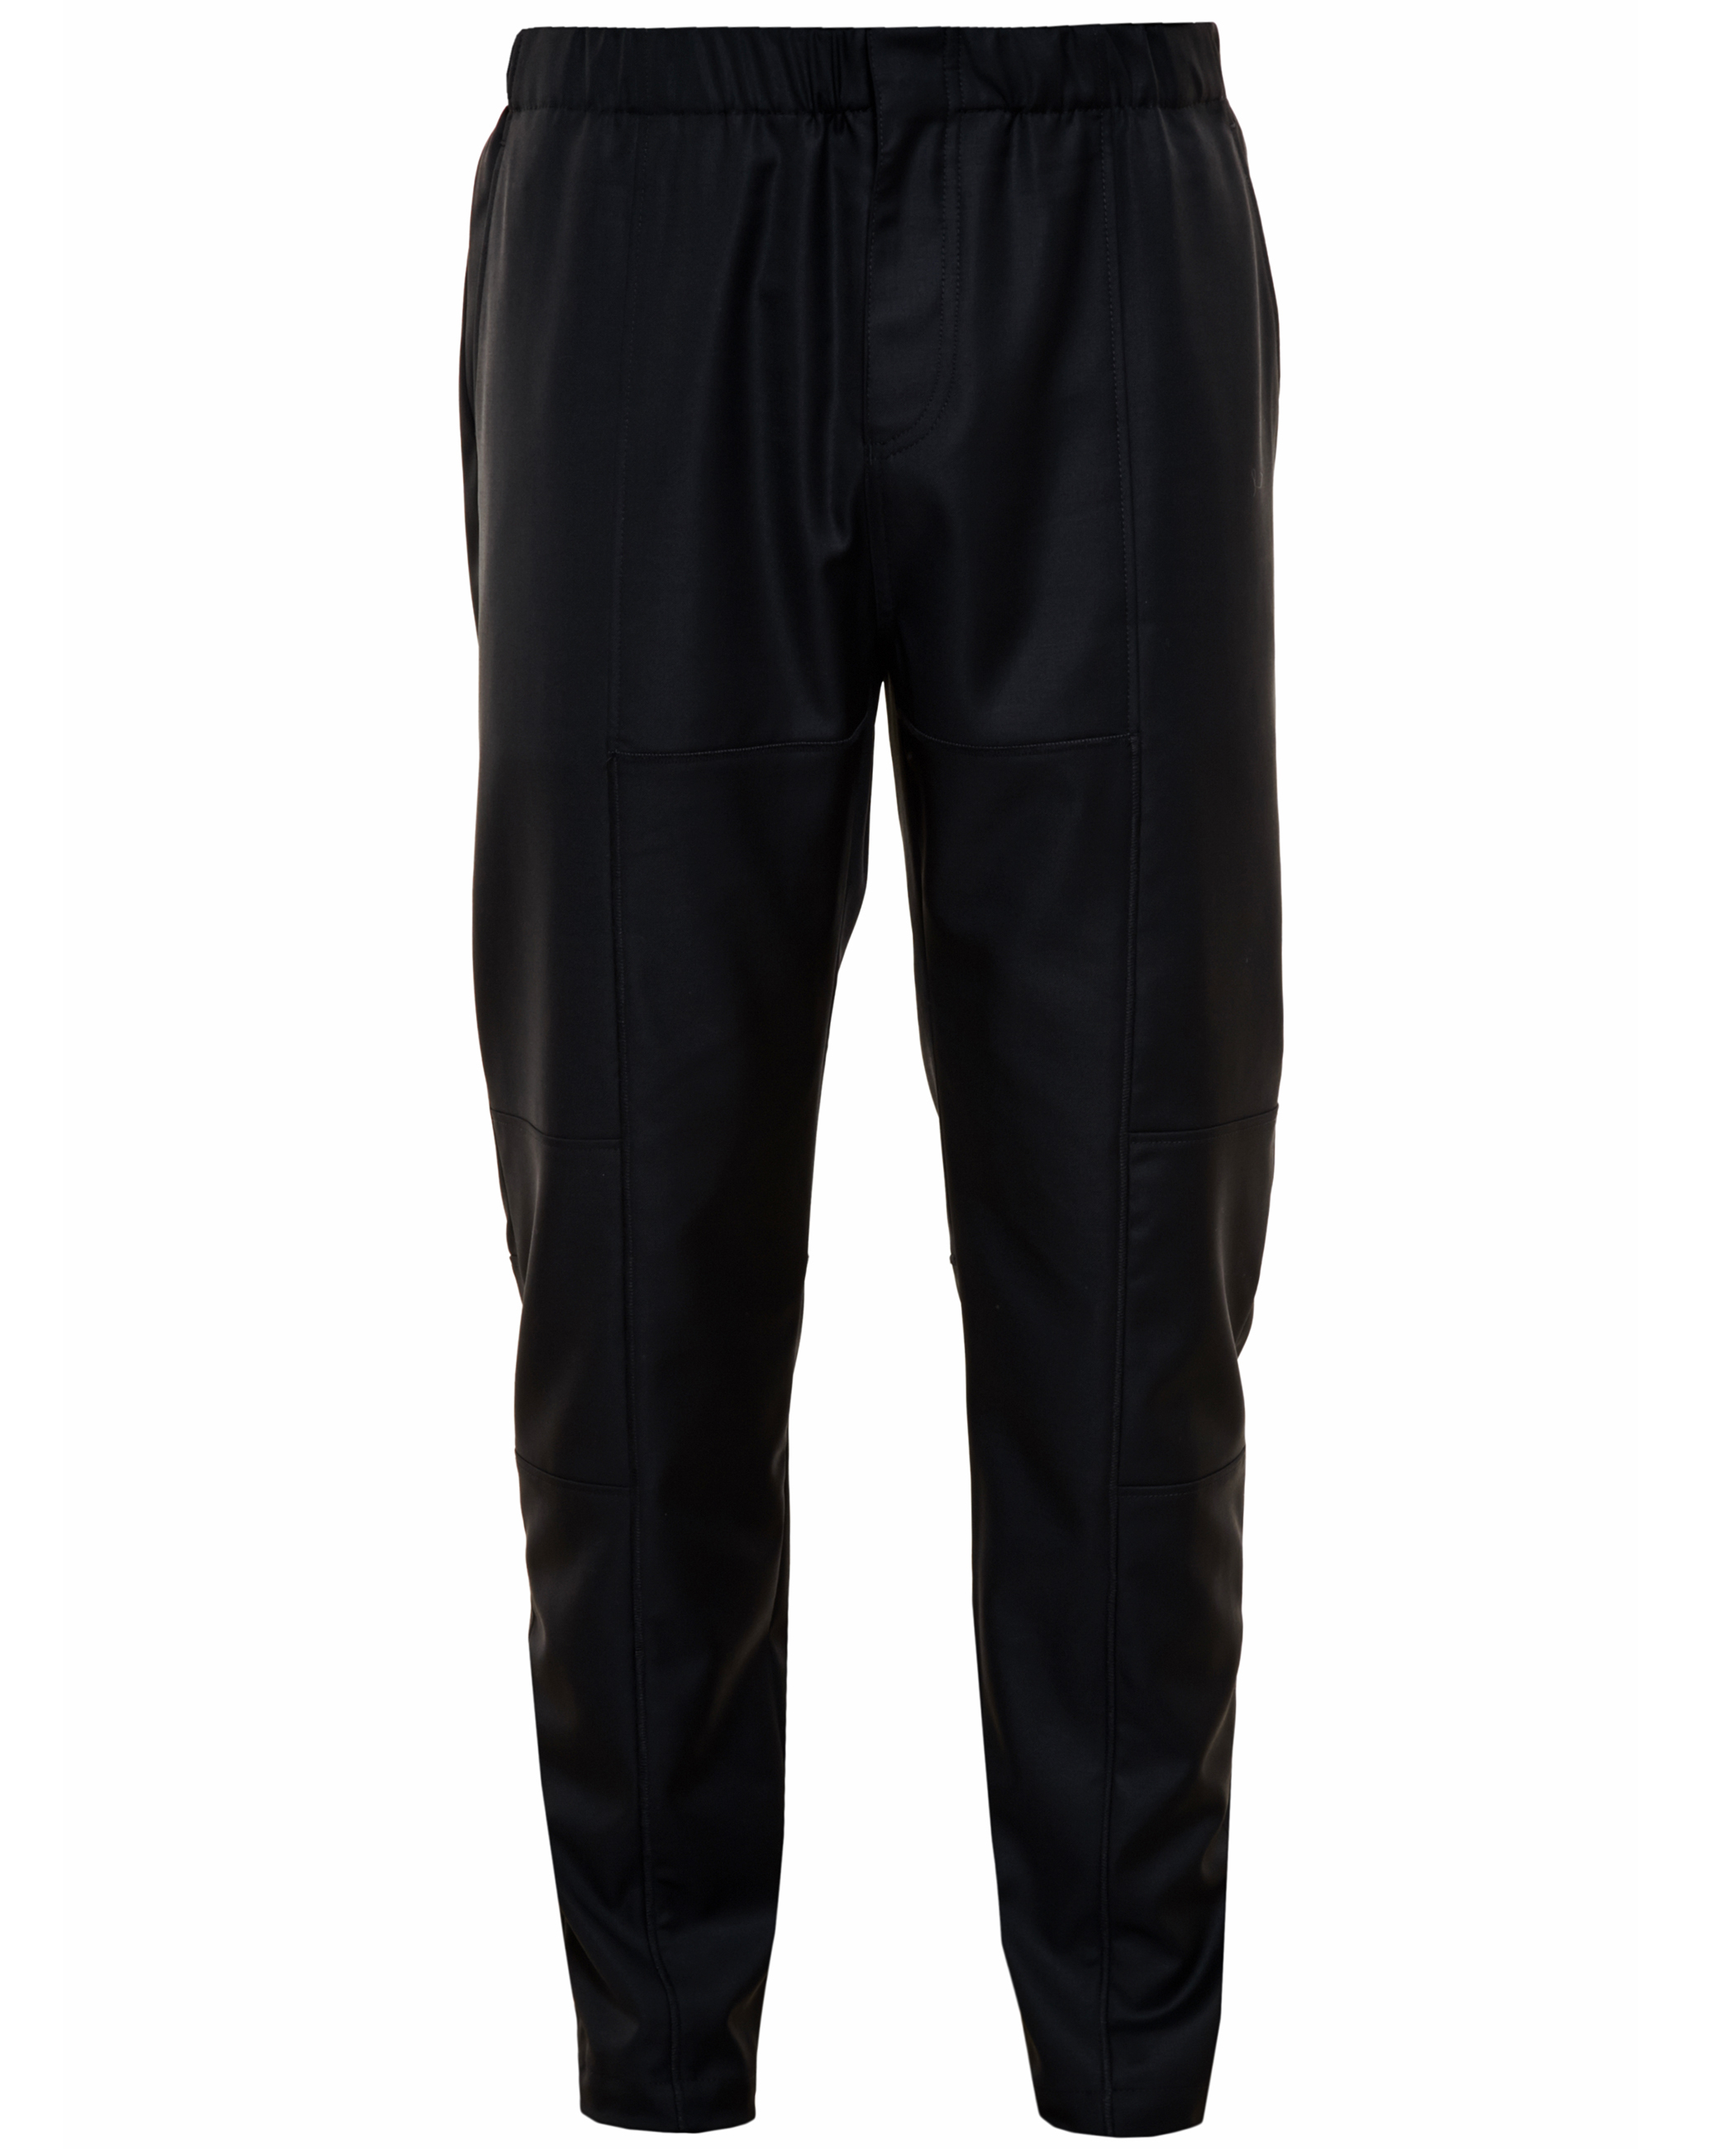 Givenchy Wool Tracksuit Bottoms in Black for Men - Lyst